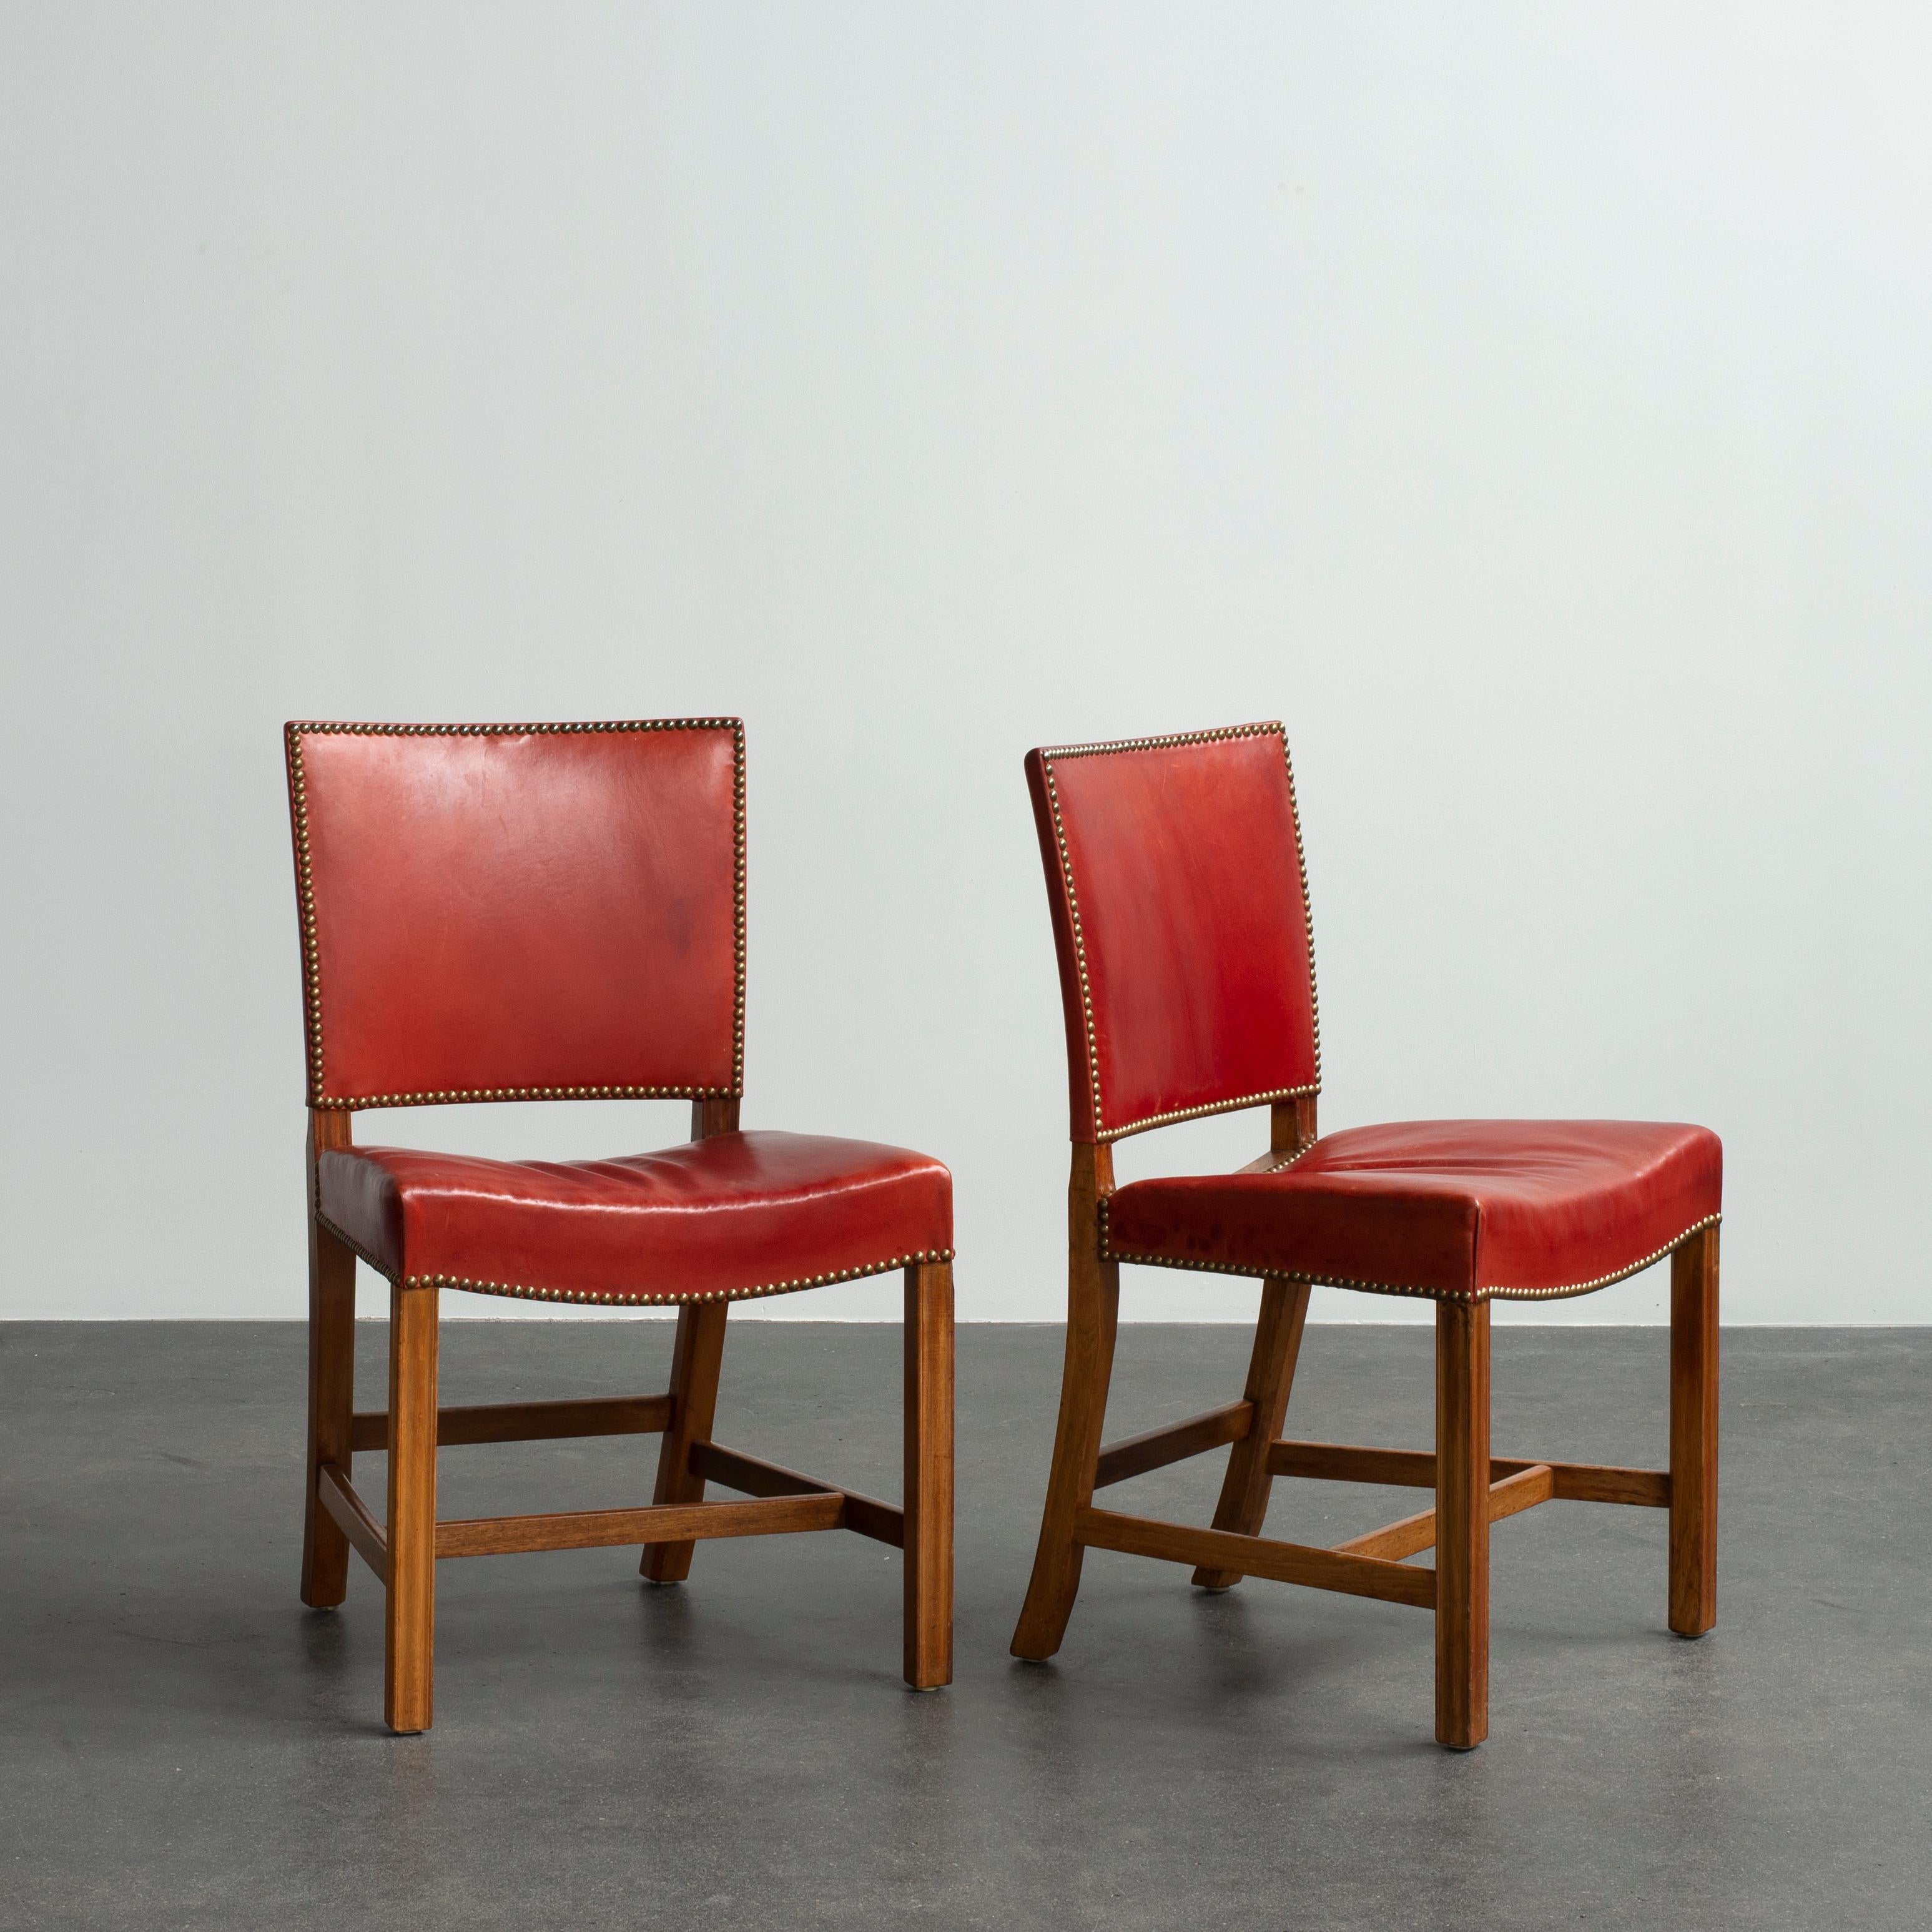 Kaare Klint pair of red chairs, mahogany, leather and brass. Executed by Rud. Rasmussen.

Underside with manufacturer's paper label RUD. RASMUSSENS/SNEDKERIER/45 NØRREBROGAD/KØBENHAVN, penciled number and architect's monogrammed paper label.